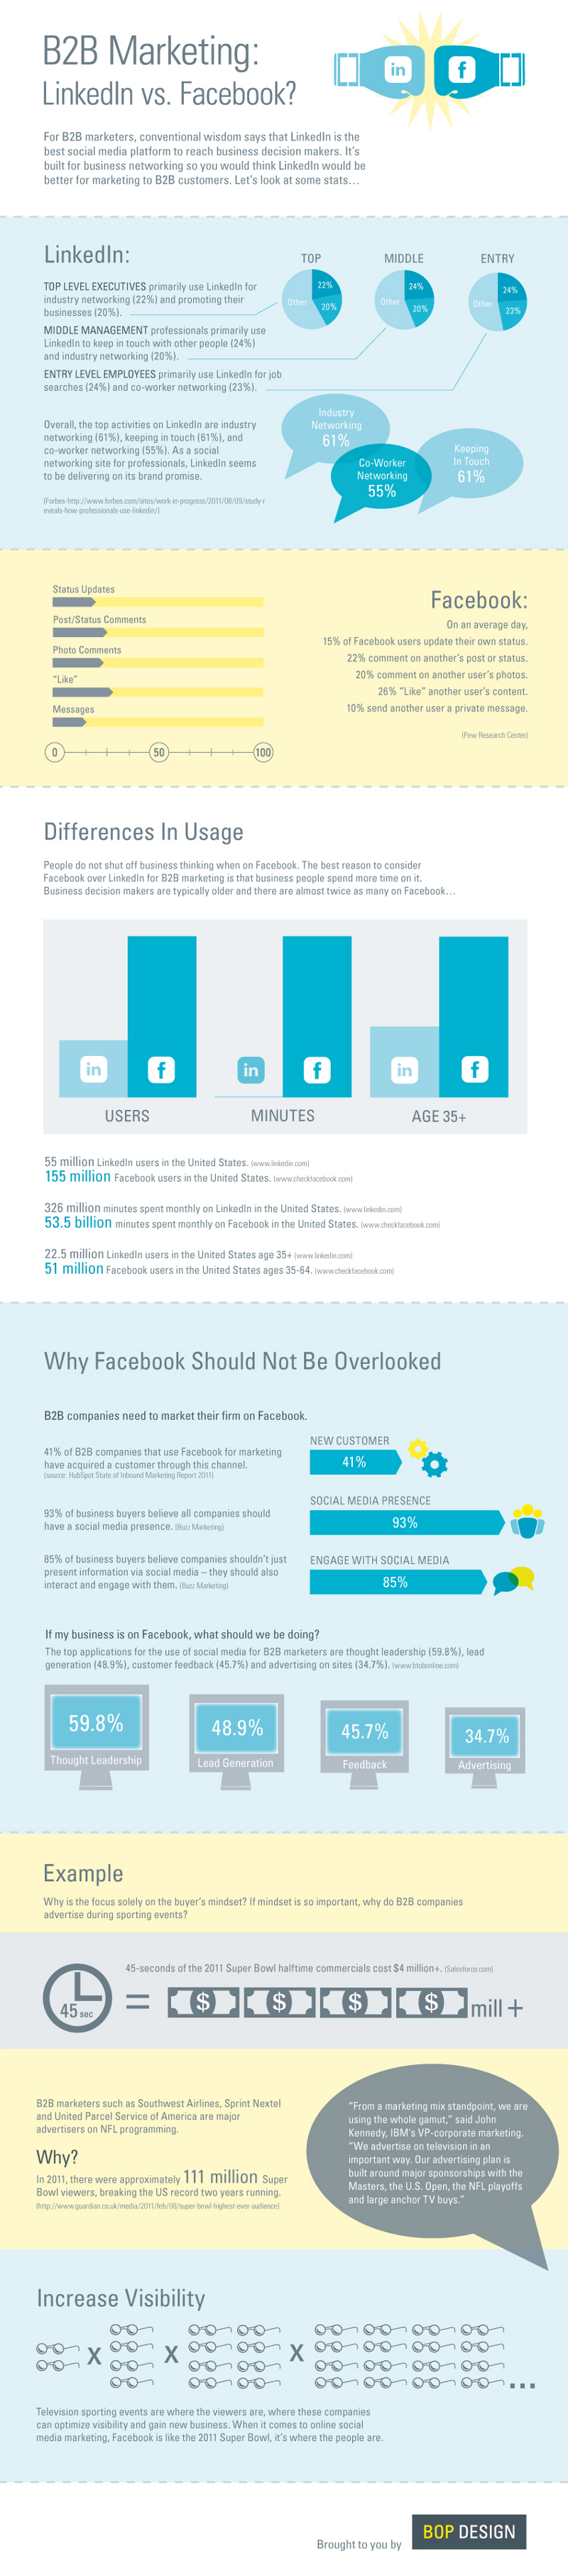 Reasons B2B Companies Should Market their Business on Facebook